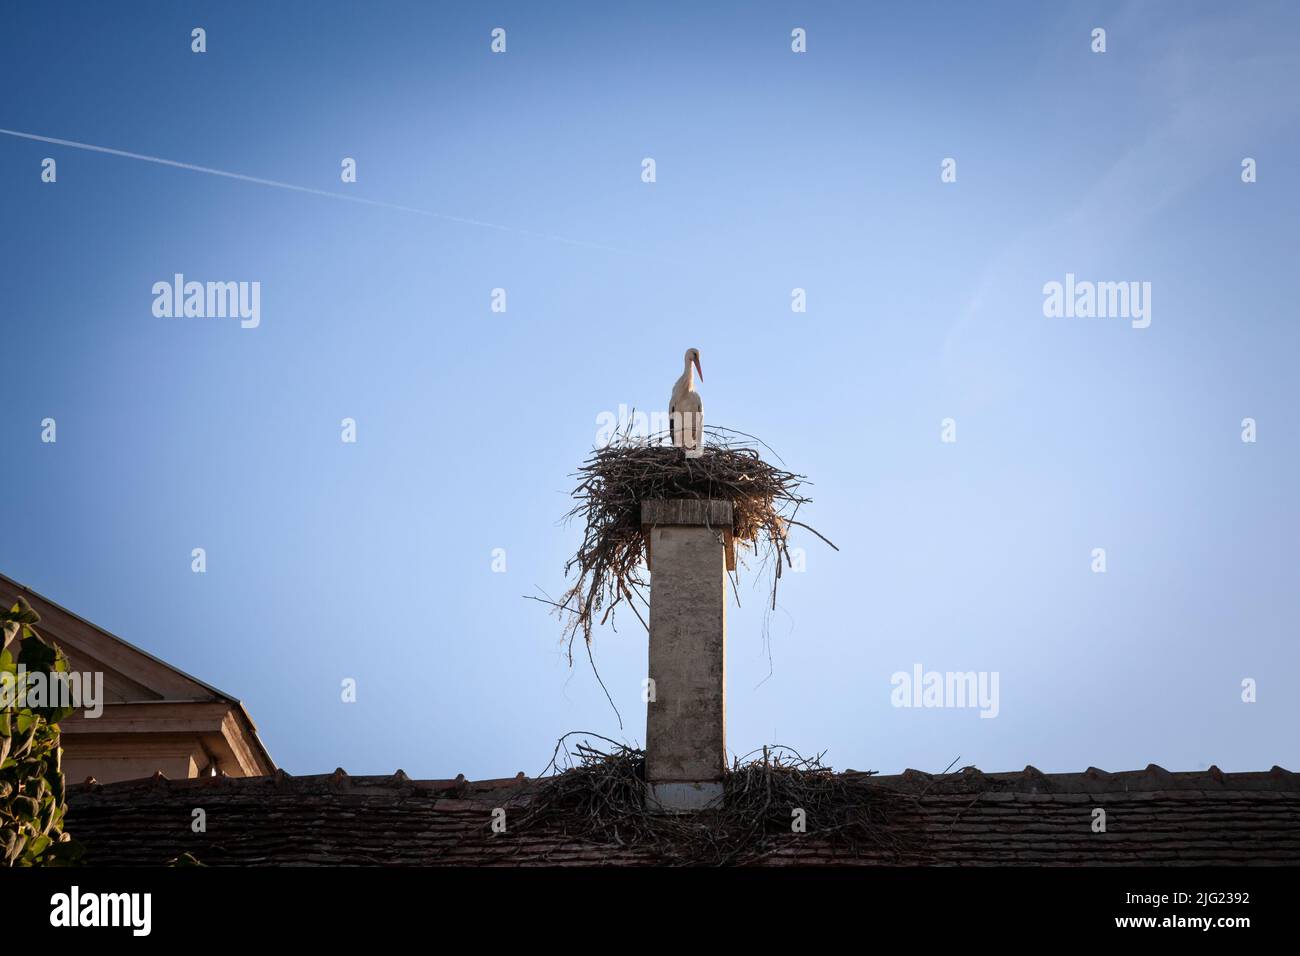 Picture of a storn nest with the bird standing on it during a sunny afternoon. Storks are large, long-legged, long-necked wading birds with long, stou Stock Photo